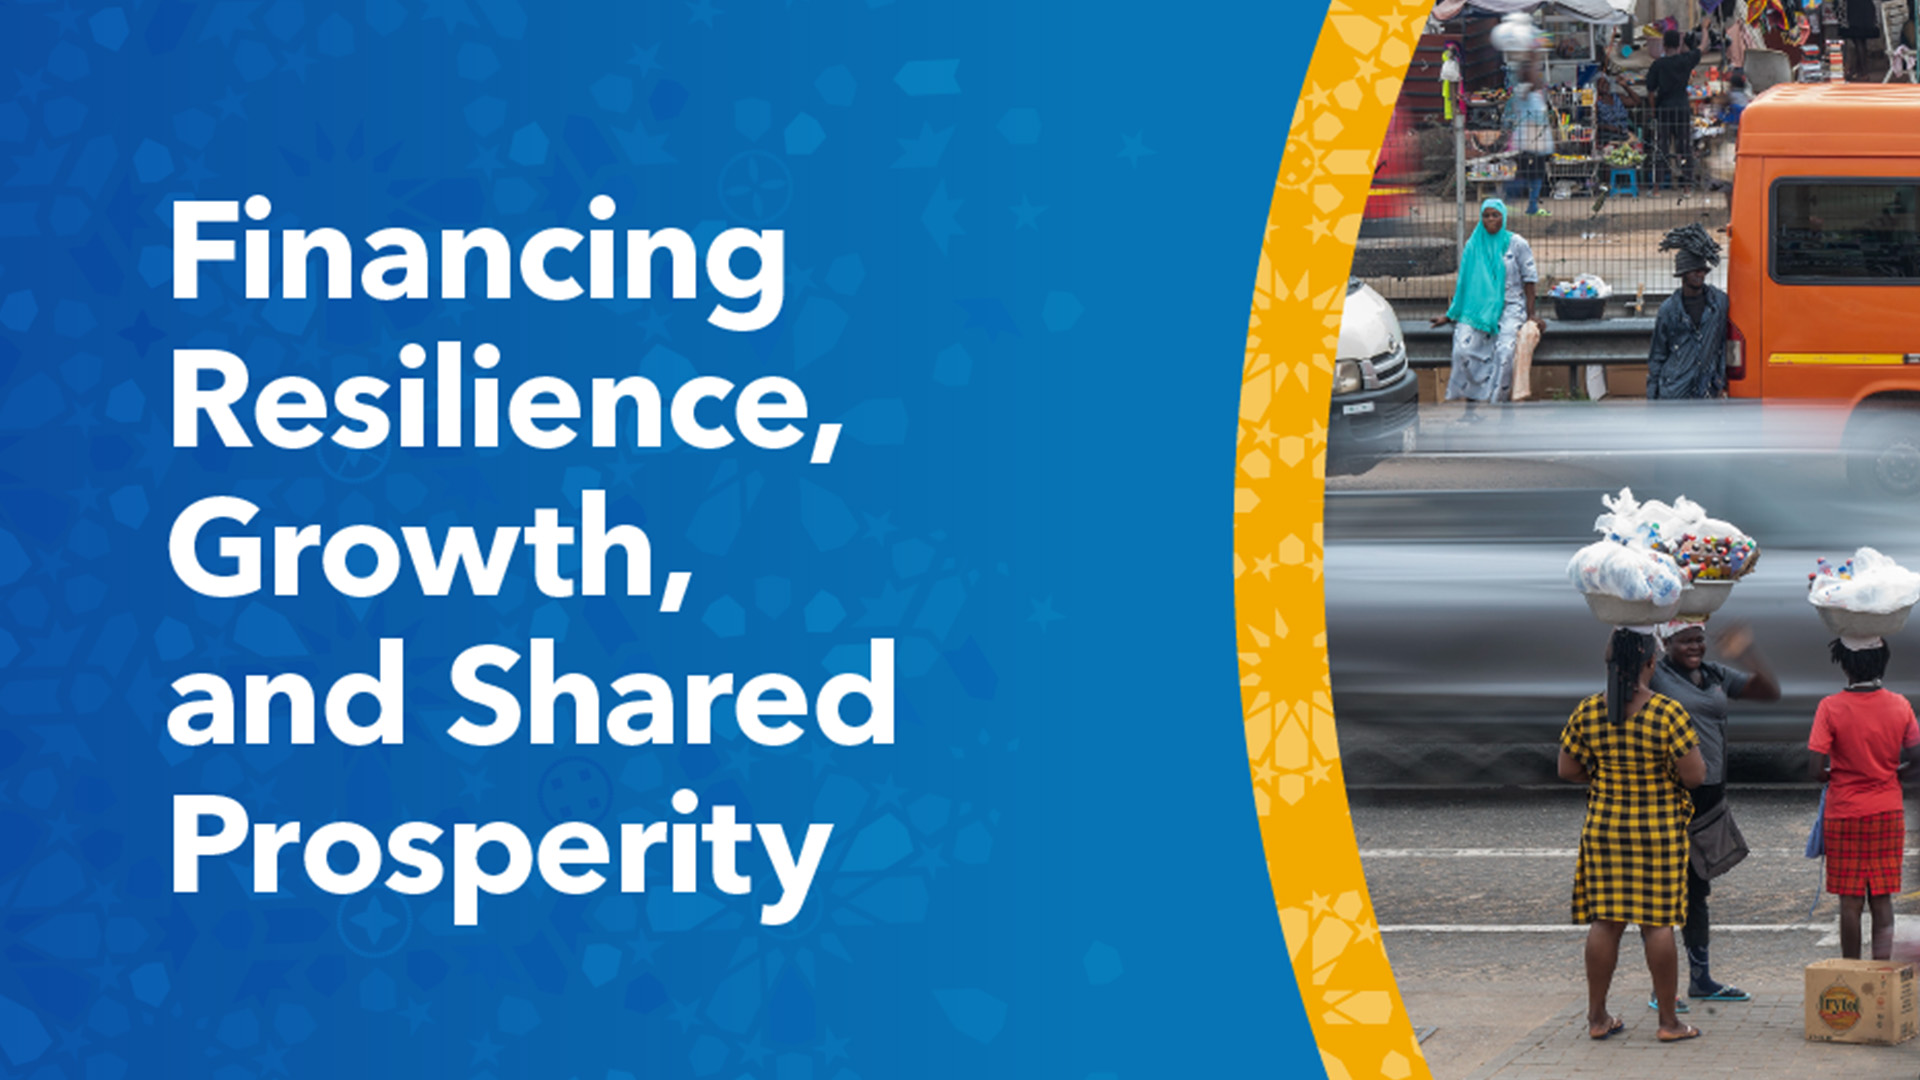 IMF Seminar: Financing Resilience, Growth and Shared Prosperity